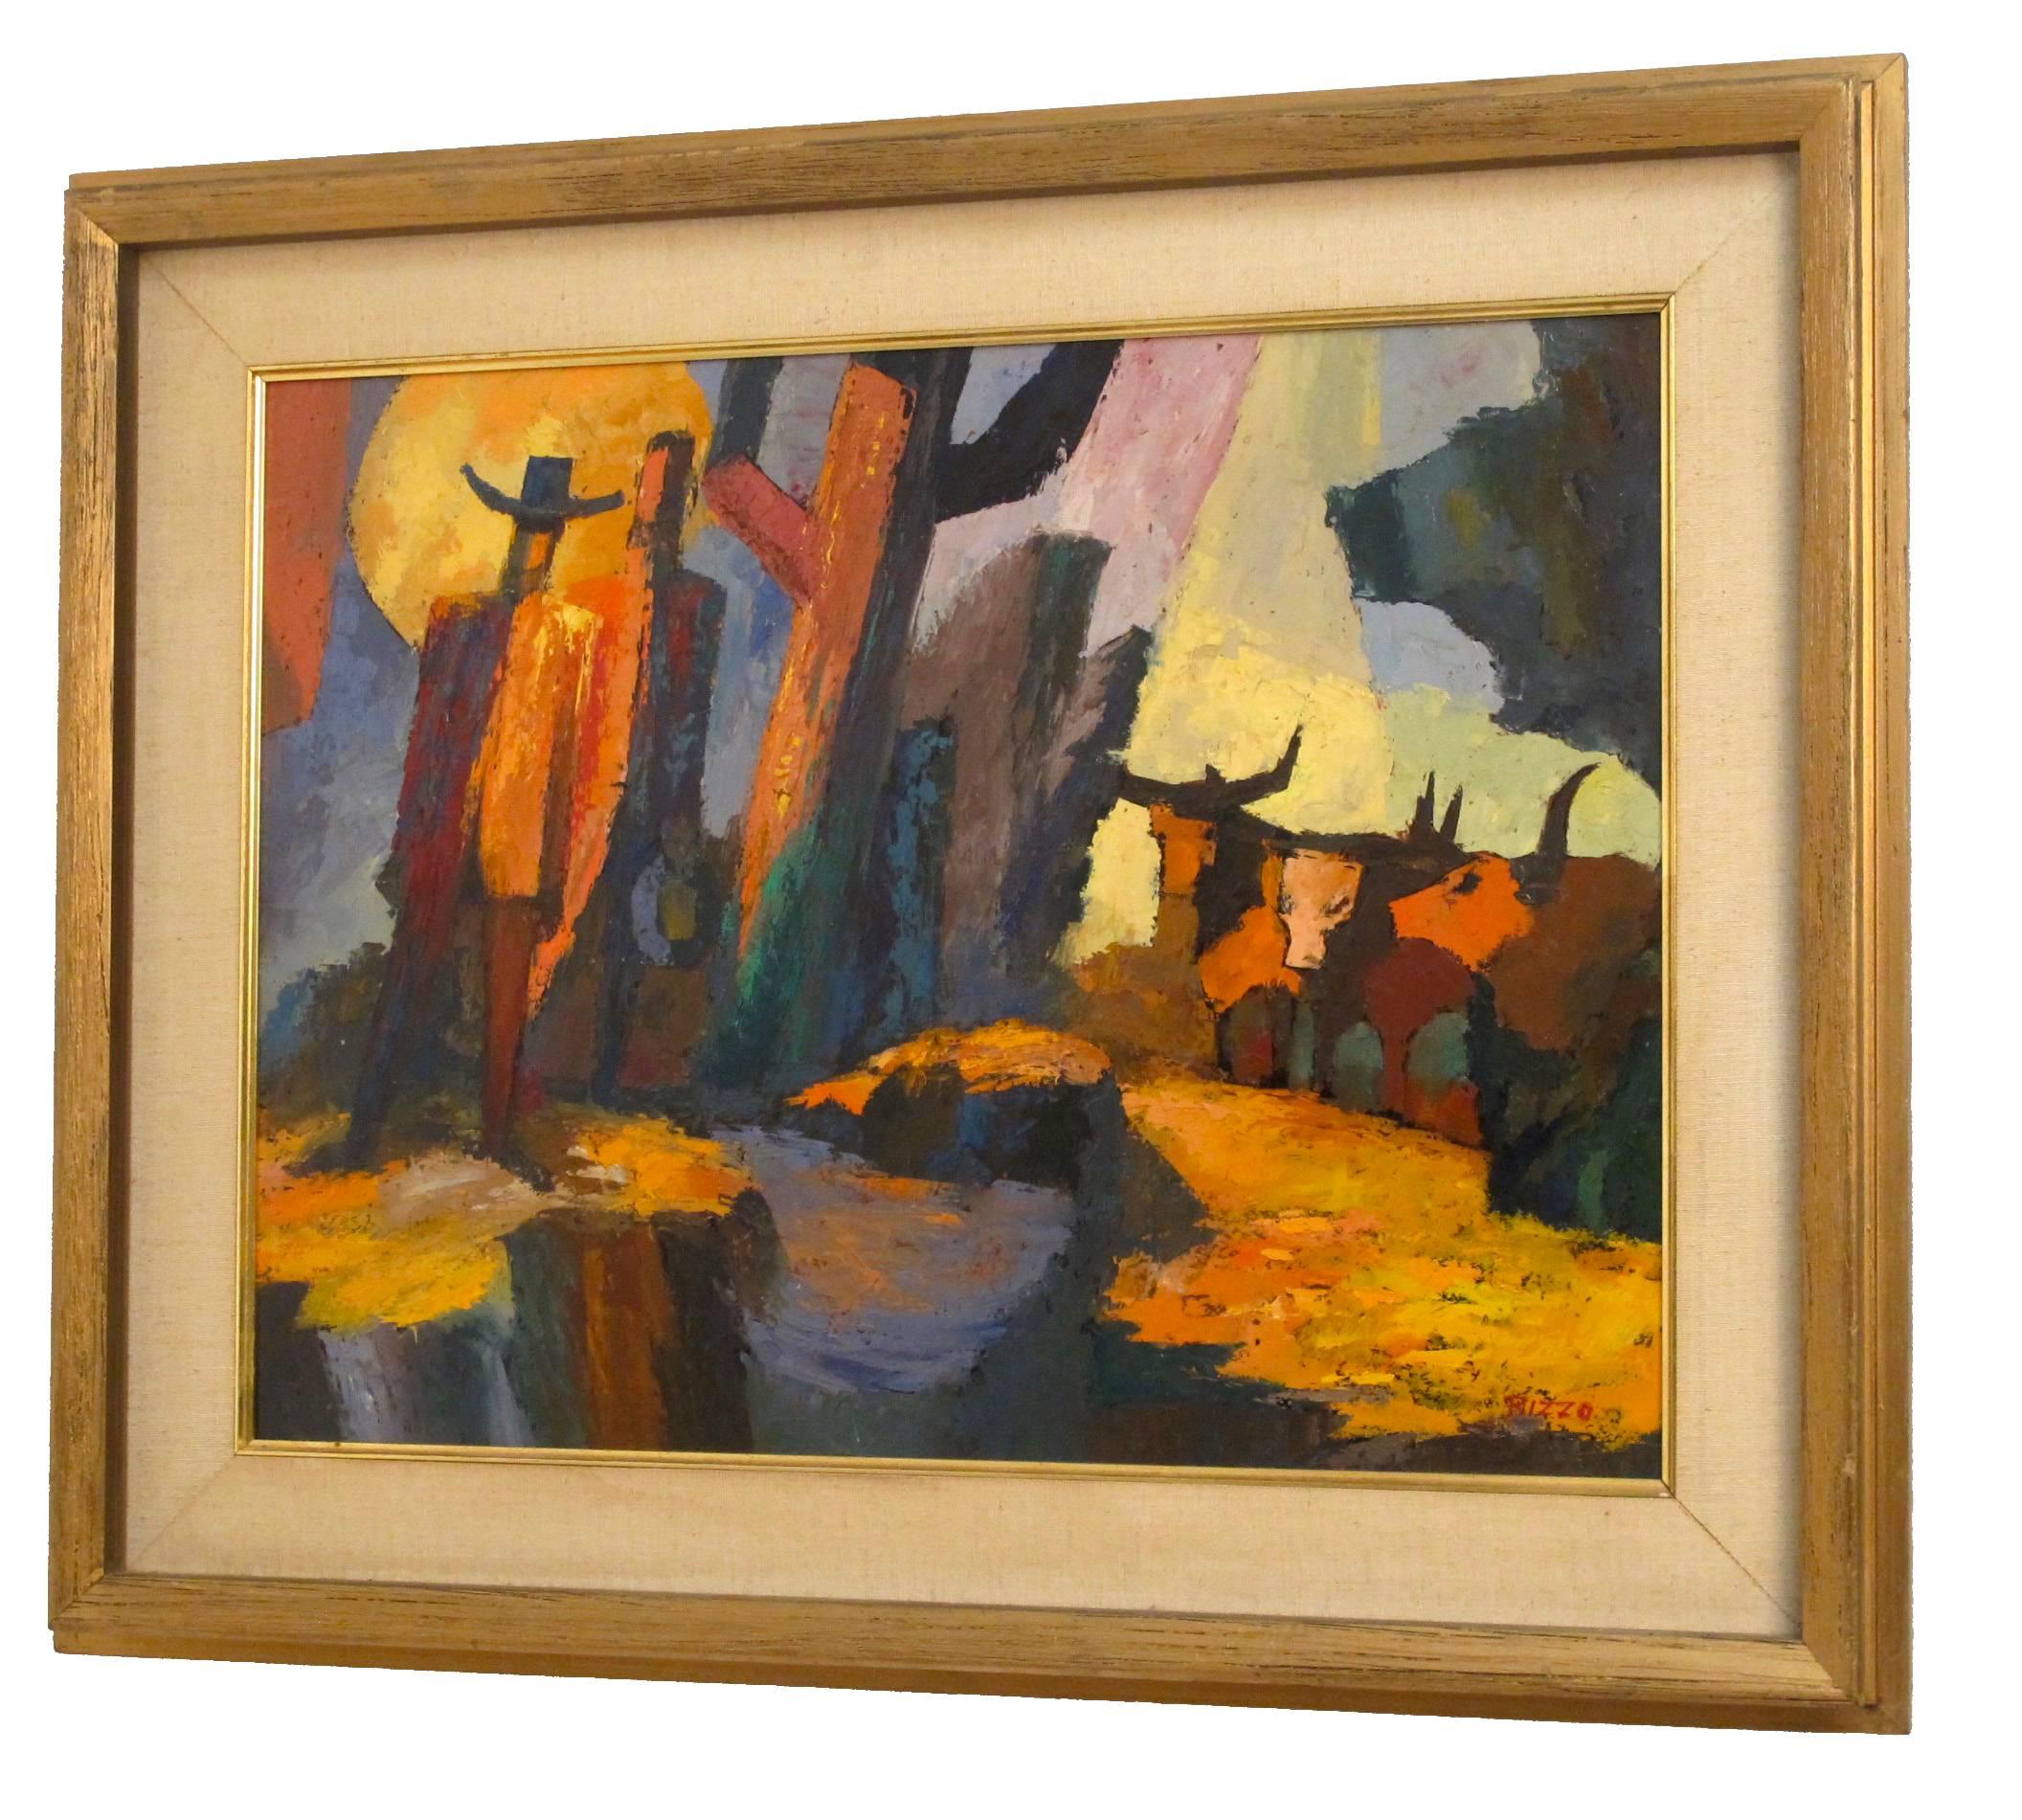 An abstract western landscape oil painting on panel in original frame by California artist Anthony Rizzo (b.1919-d.2000). American, mid-20th century.
Anthony Rizzo was active or lived in California. Anthony Rizzo is known for town-landscape and